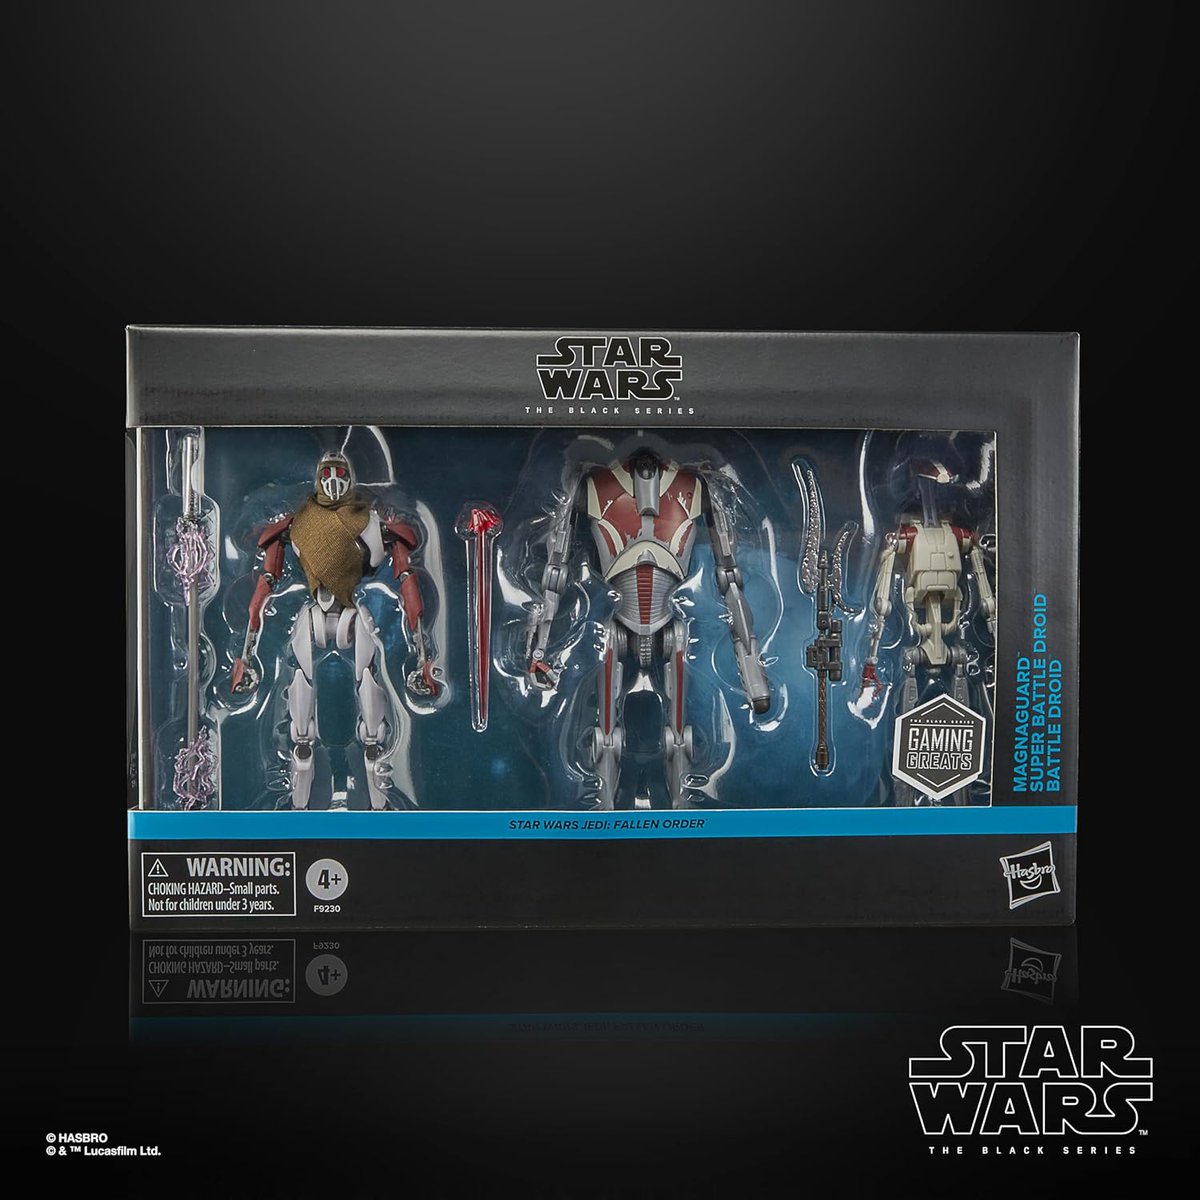 Star Wars Black Series Emperor Palpatine on Throne and MagnaGuard, Super Battle Droid, Battle Droid 3 pack now available to preorder! #StarWars #ad 

Emperor Palpatine ► amzn.to/44wgeXA
3 PK ► amzn.to/4dqPnQM

#blackseries #amazon #Maythe4thBeWithYou